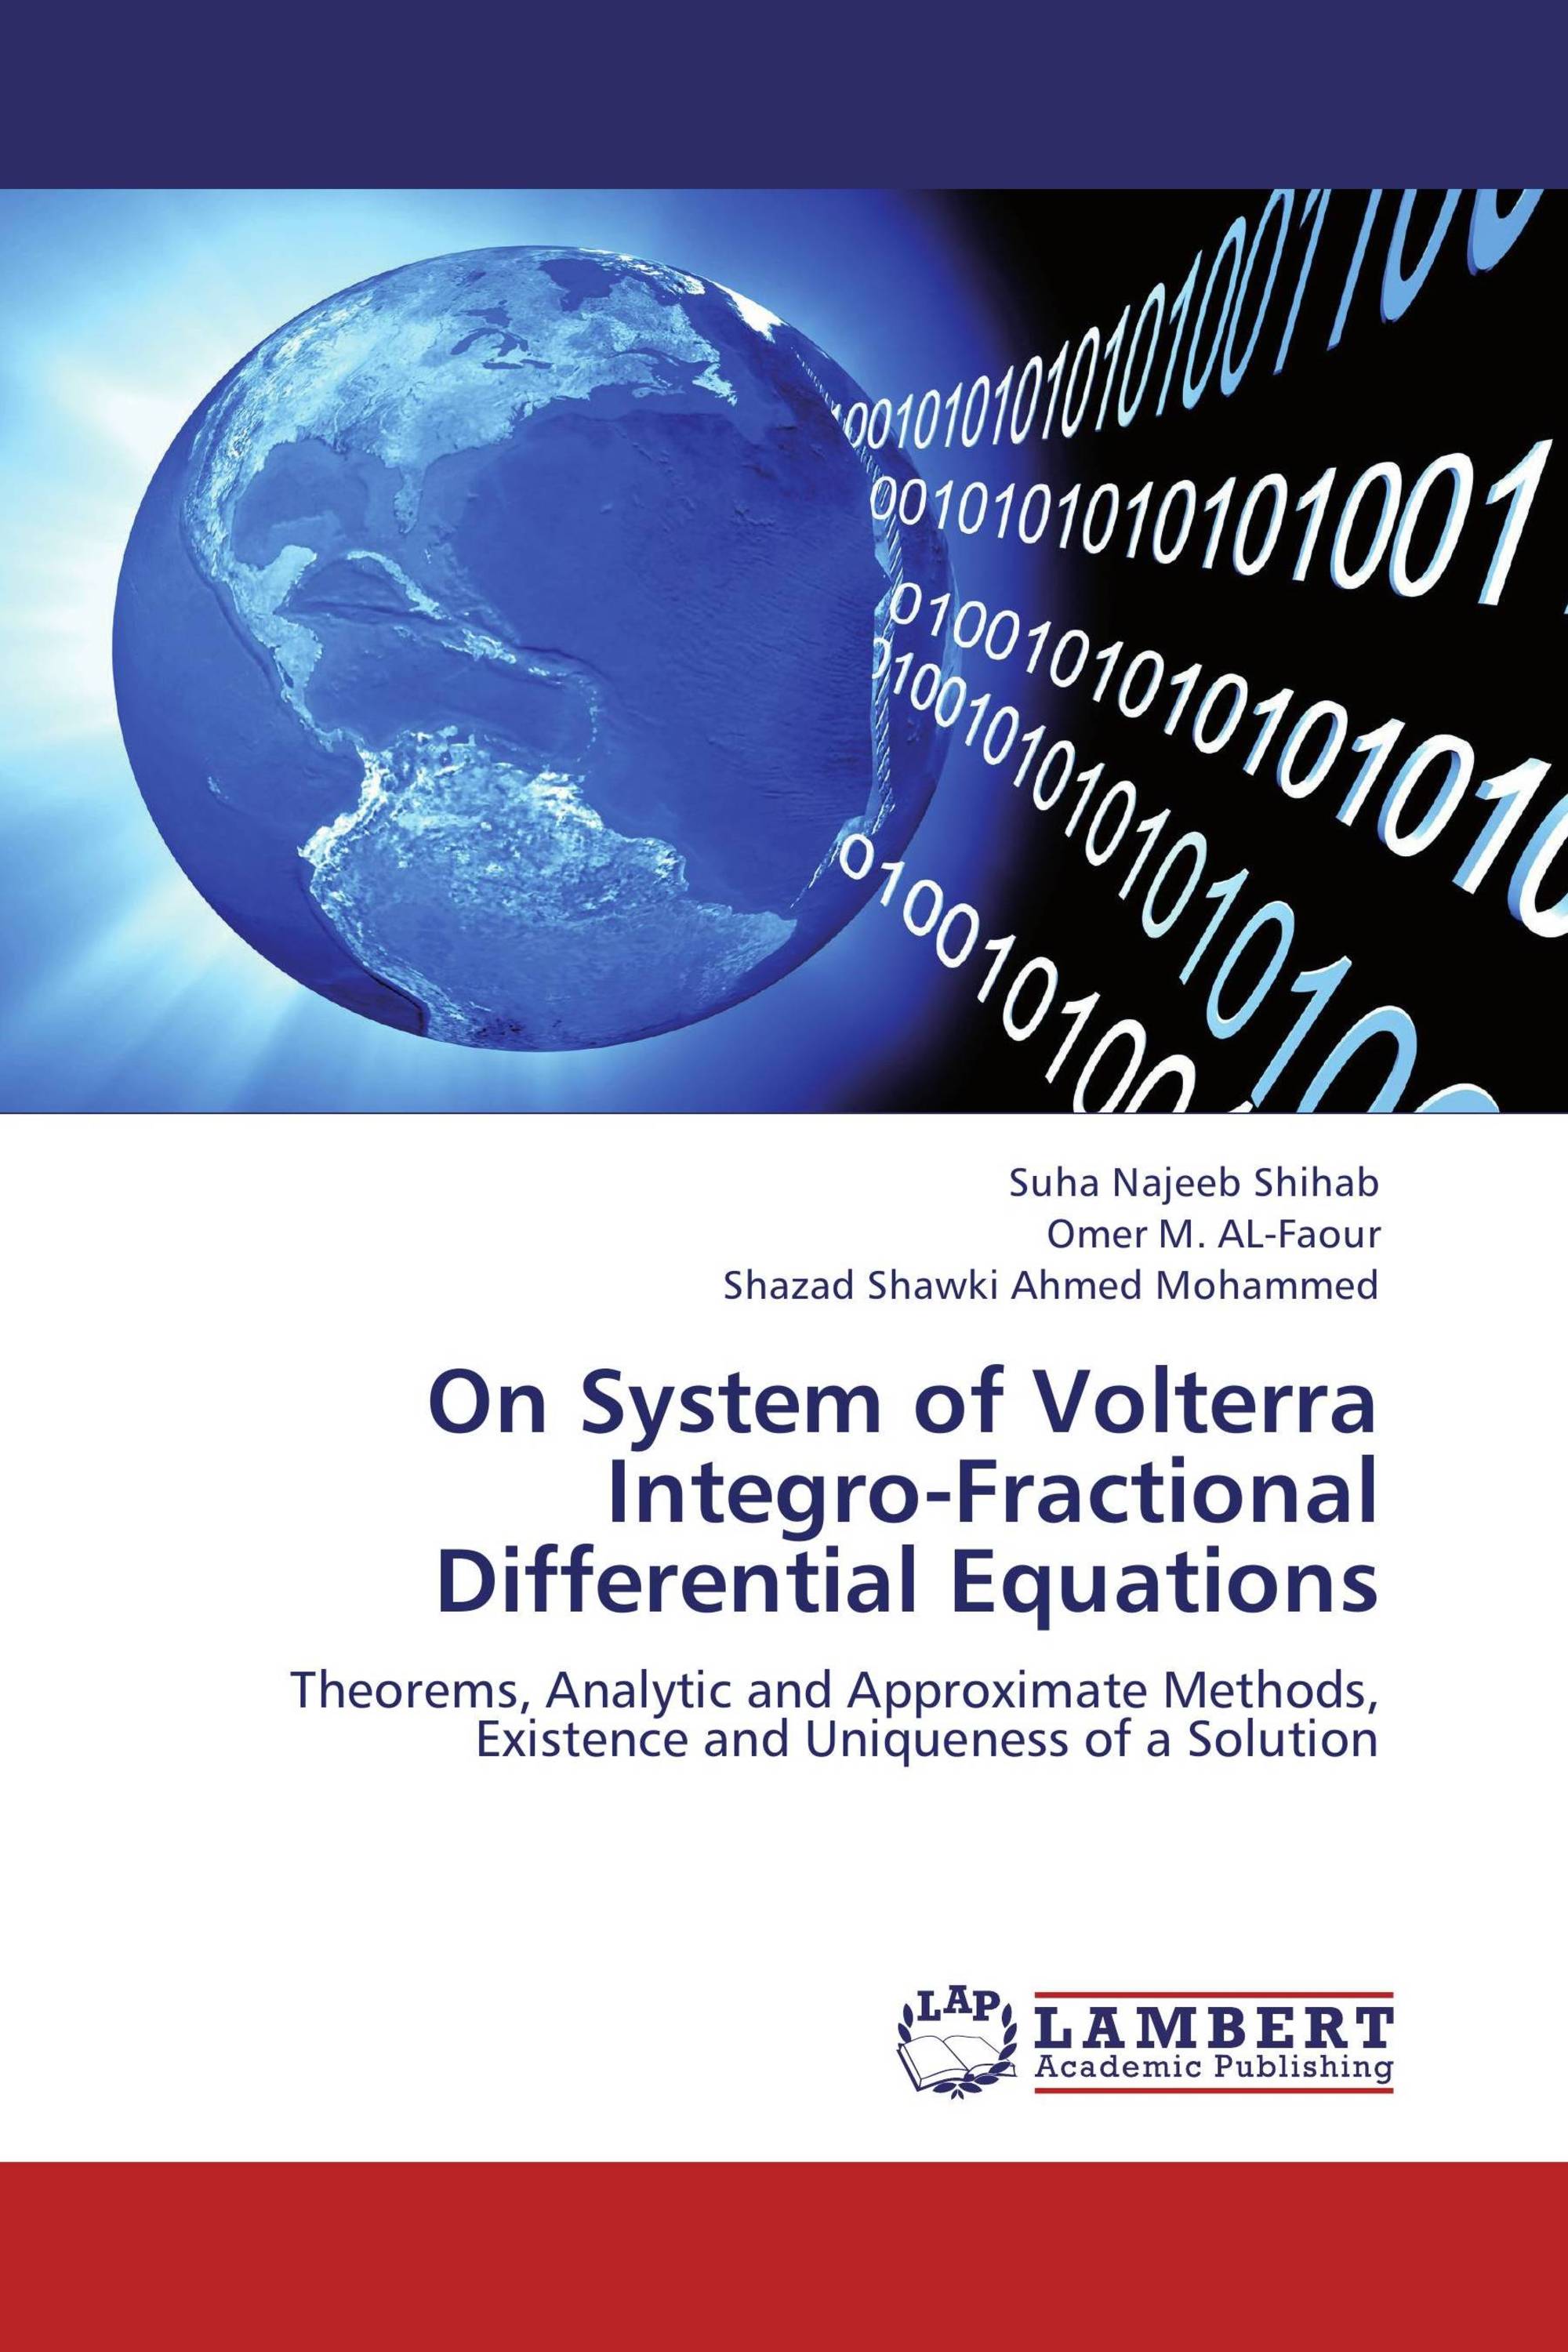 On System of Volterra Integro-Fractional Differential Equations